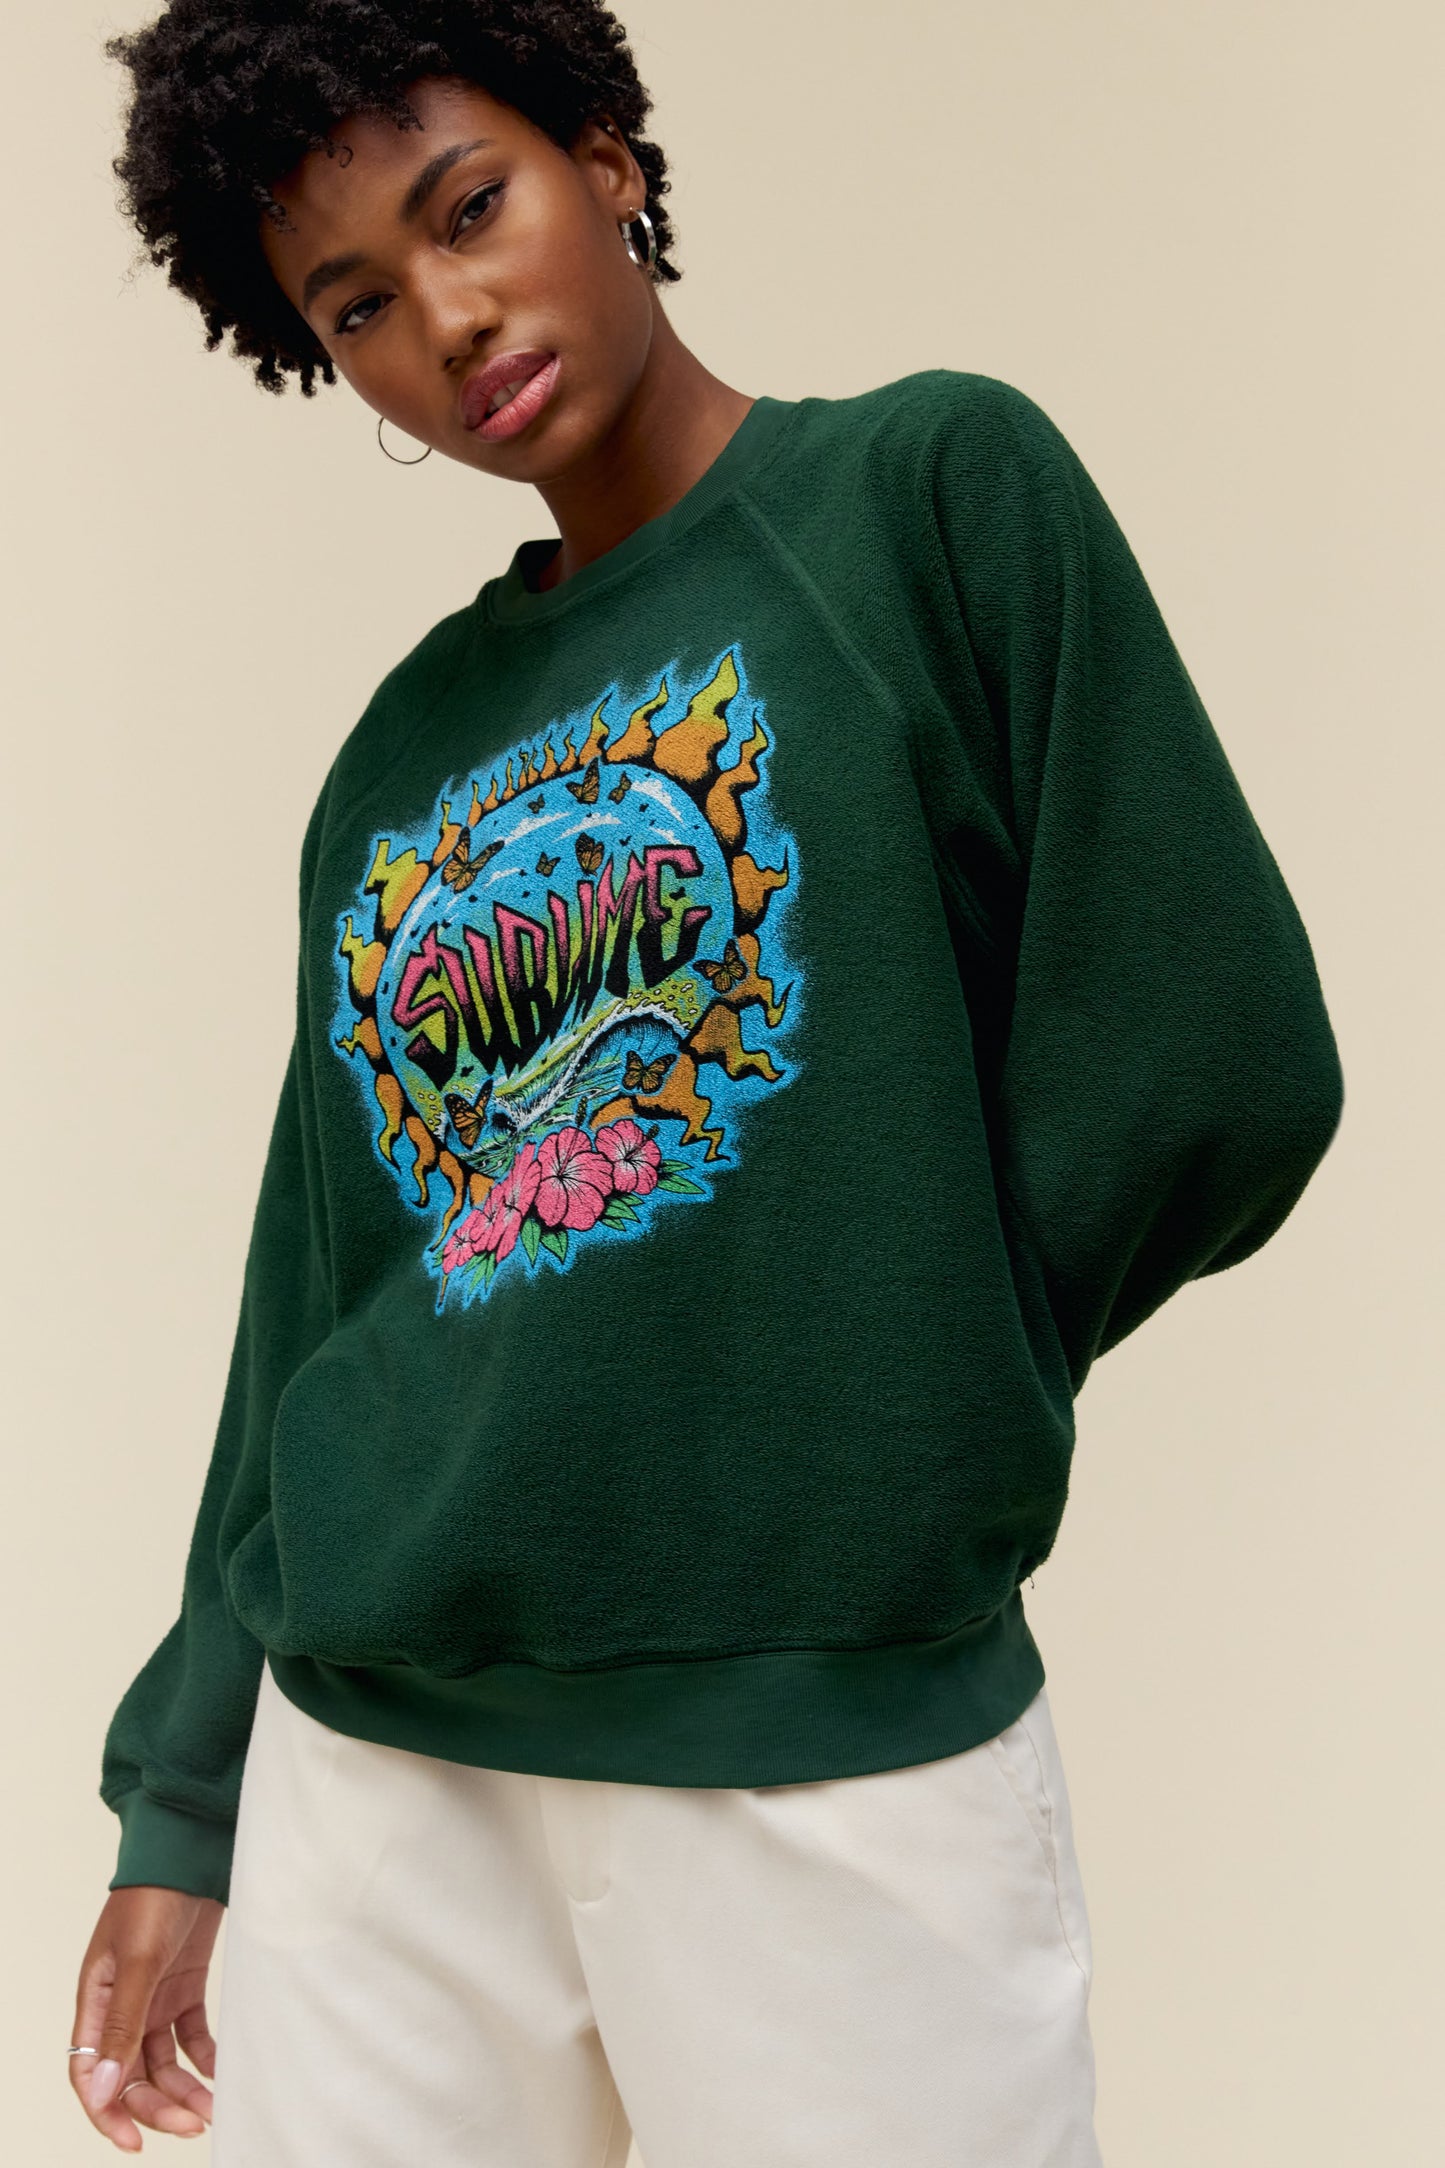 Model wearing a Sublime graphic sweatshirt in vintage green with a reverse fleece construction